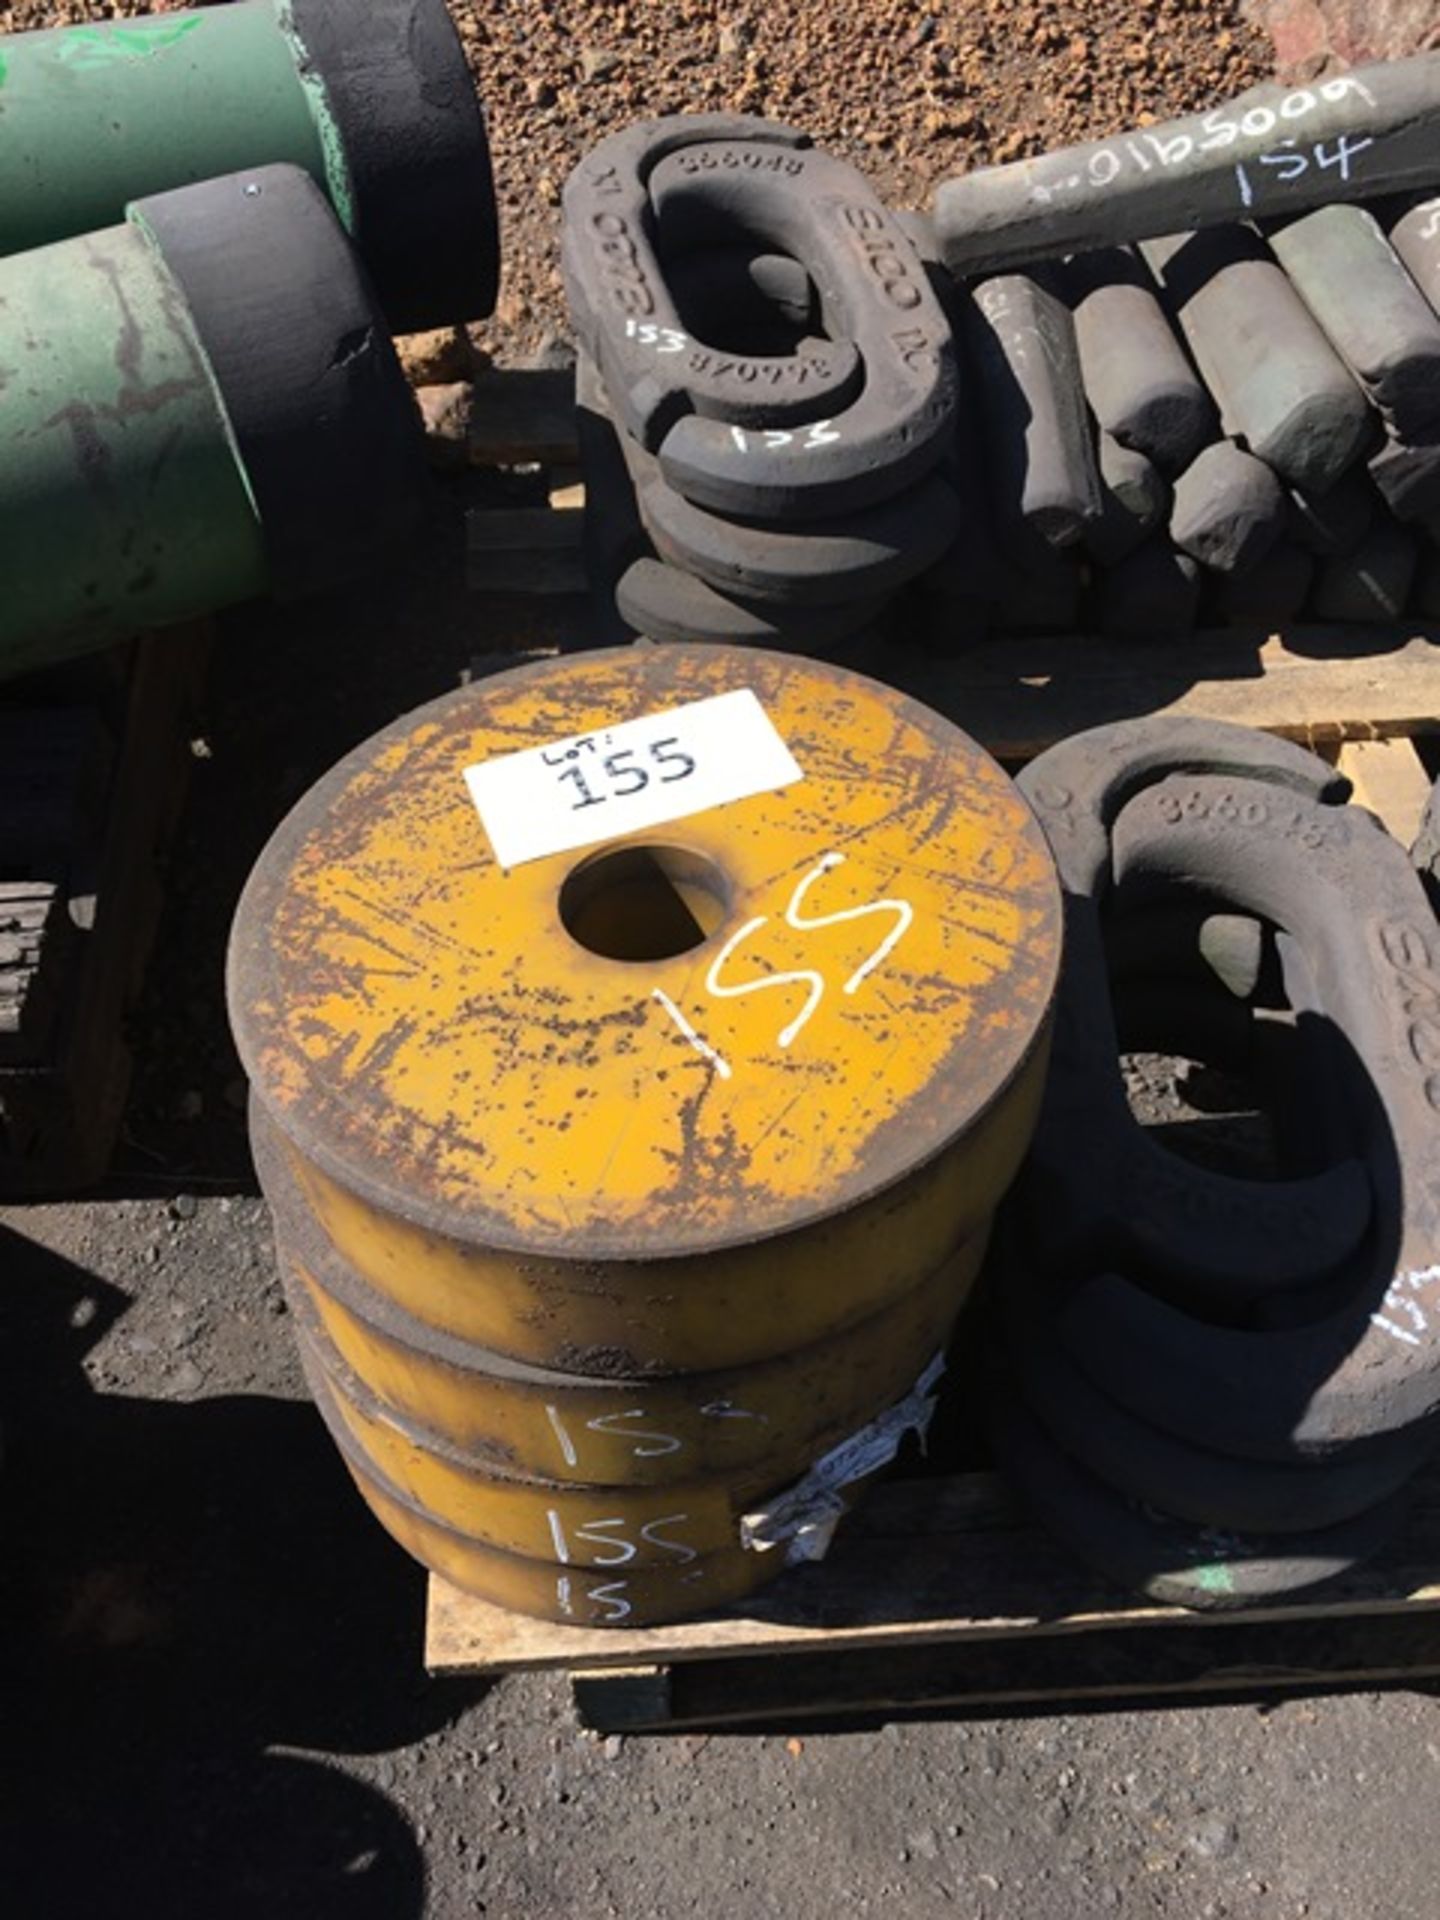 4 X WEAR LINERS - TO BE SOLD AS ONE LOT(LOCATED IN MIDDELBURG, MPUMALANGA)